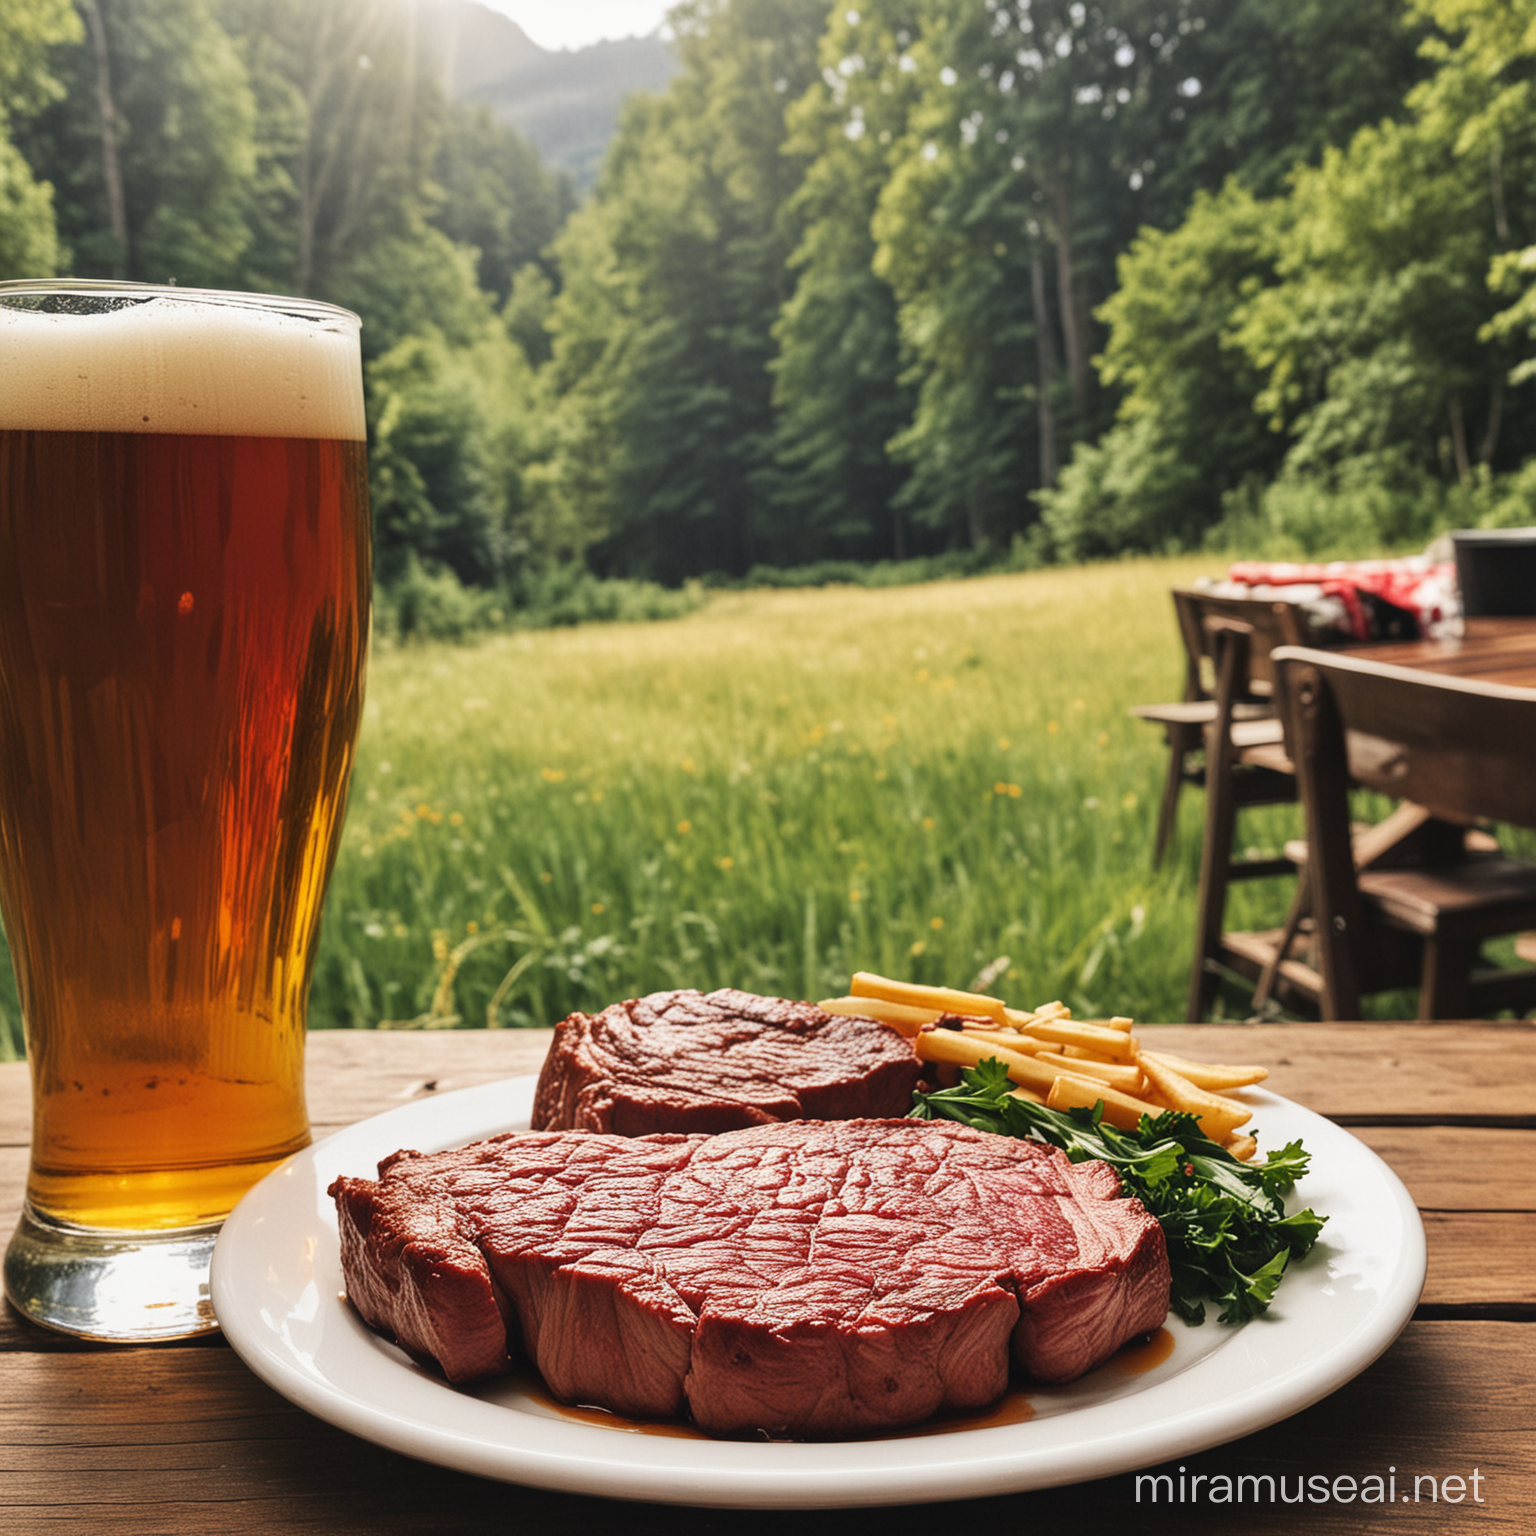 Red meat and a glass of beer and seeing nature 